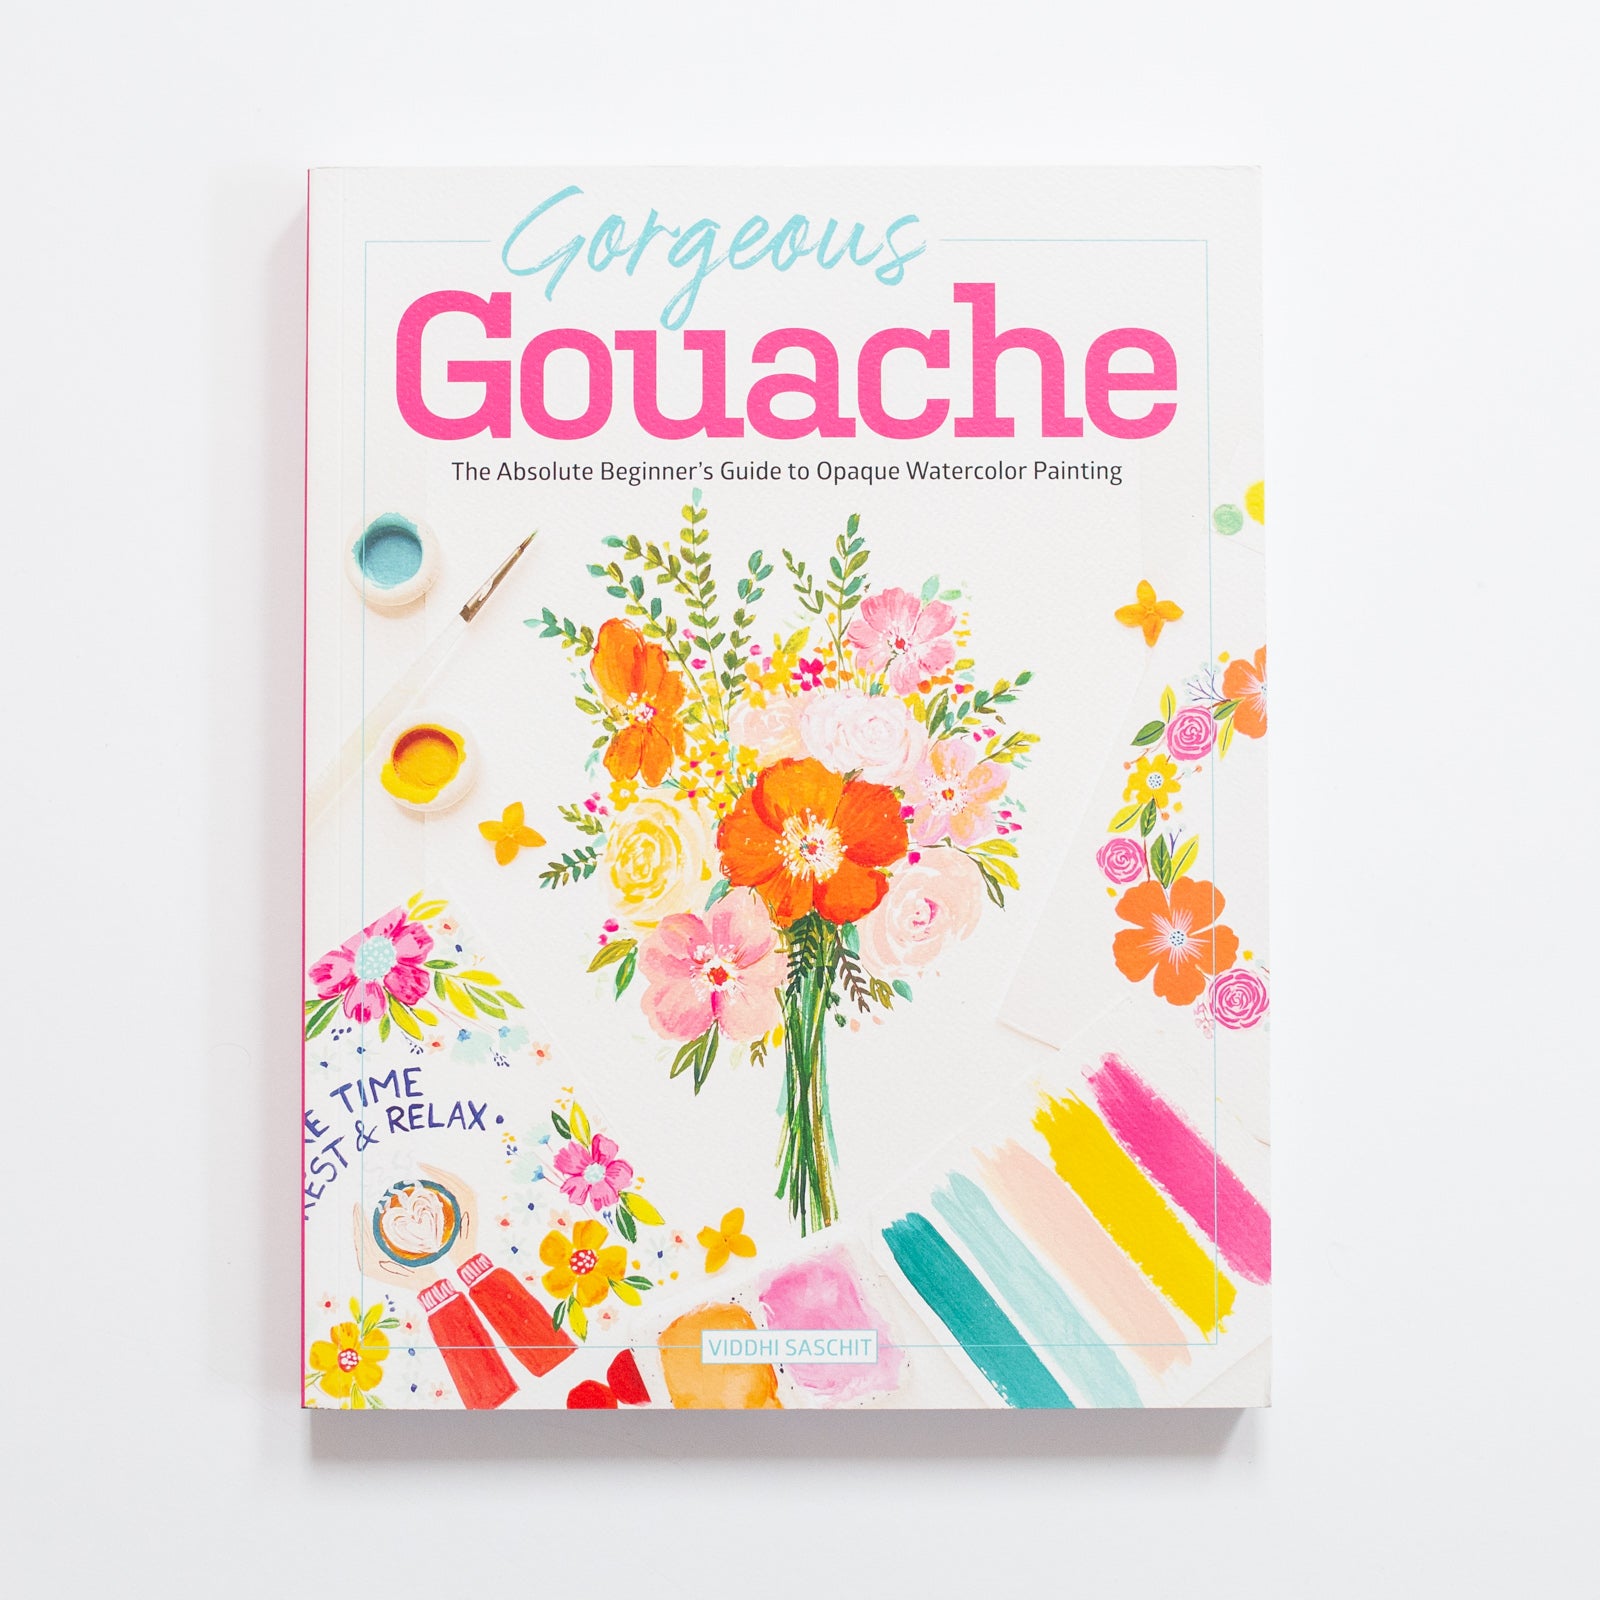 Gorgeous Gouache: The Absolute Beginner's Guide to Opaque Watercolor Painting by Viddhi Saschit